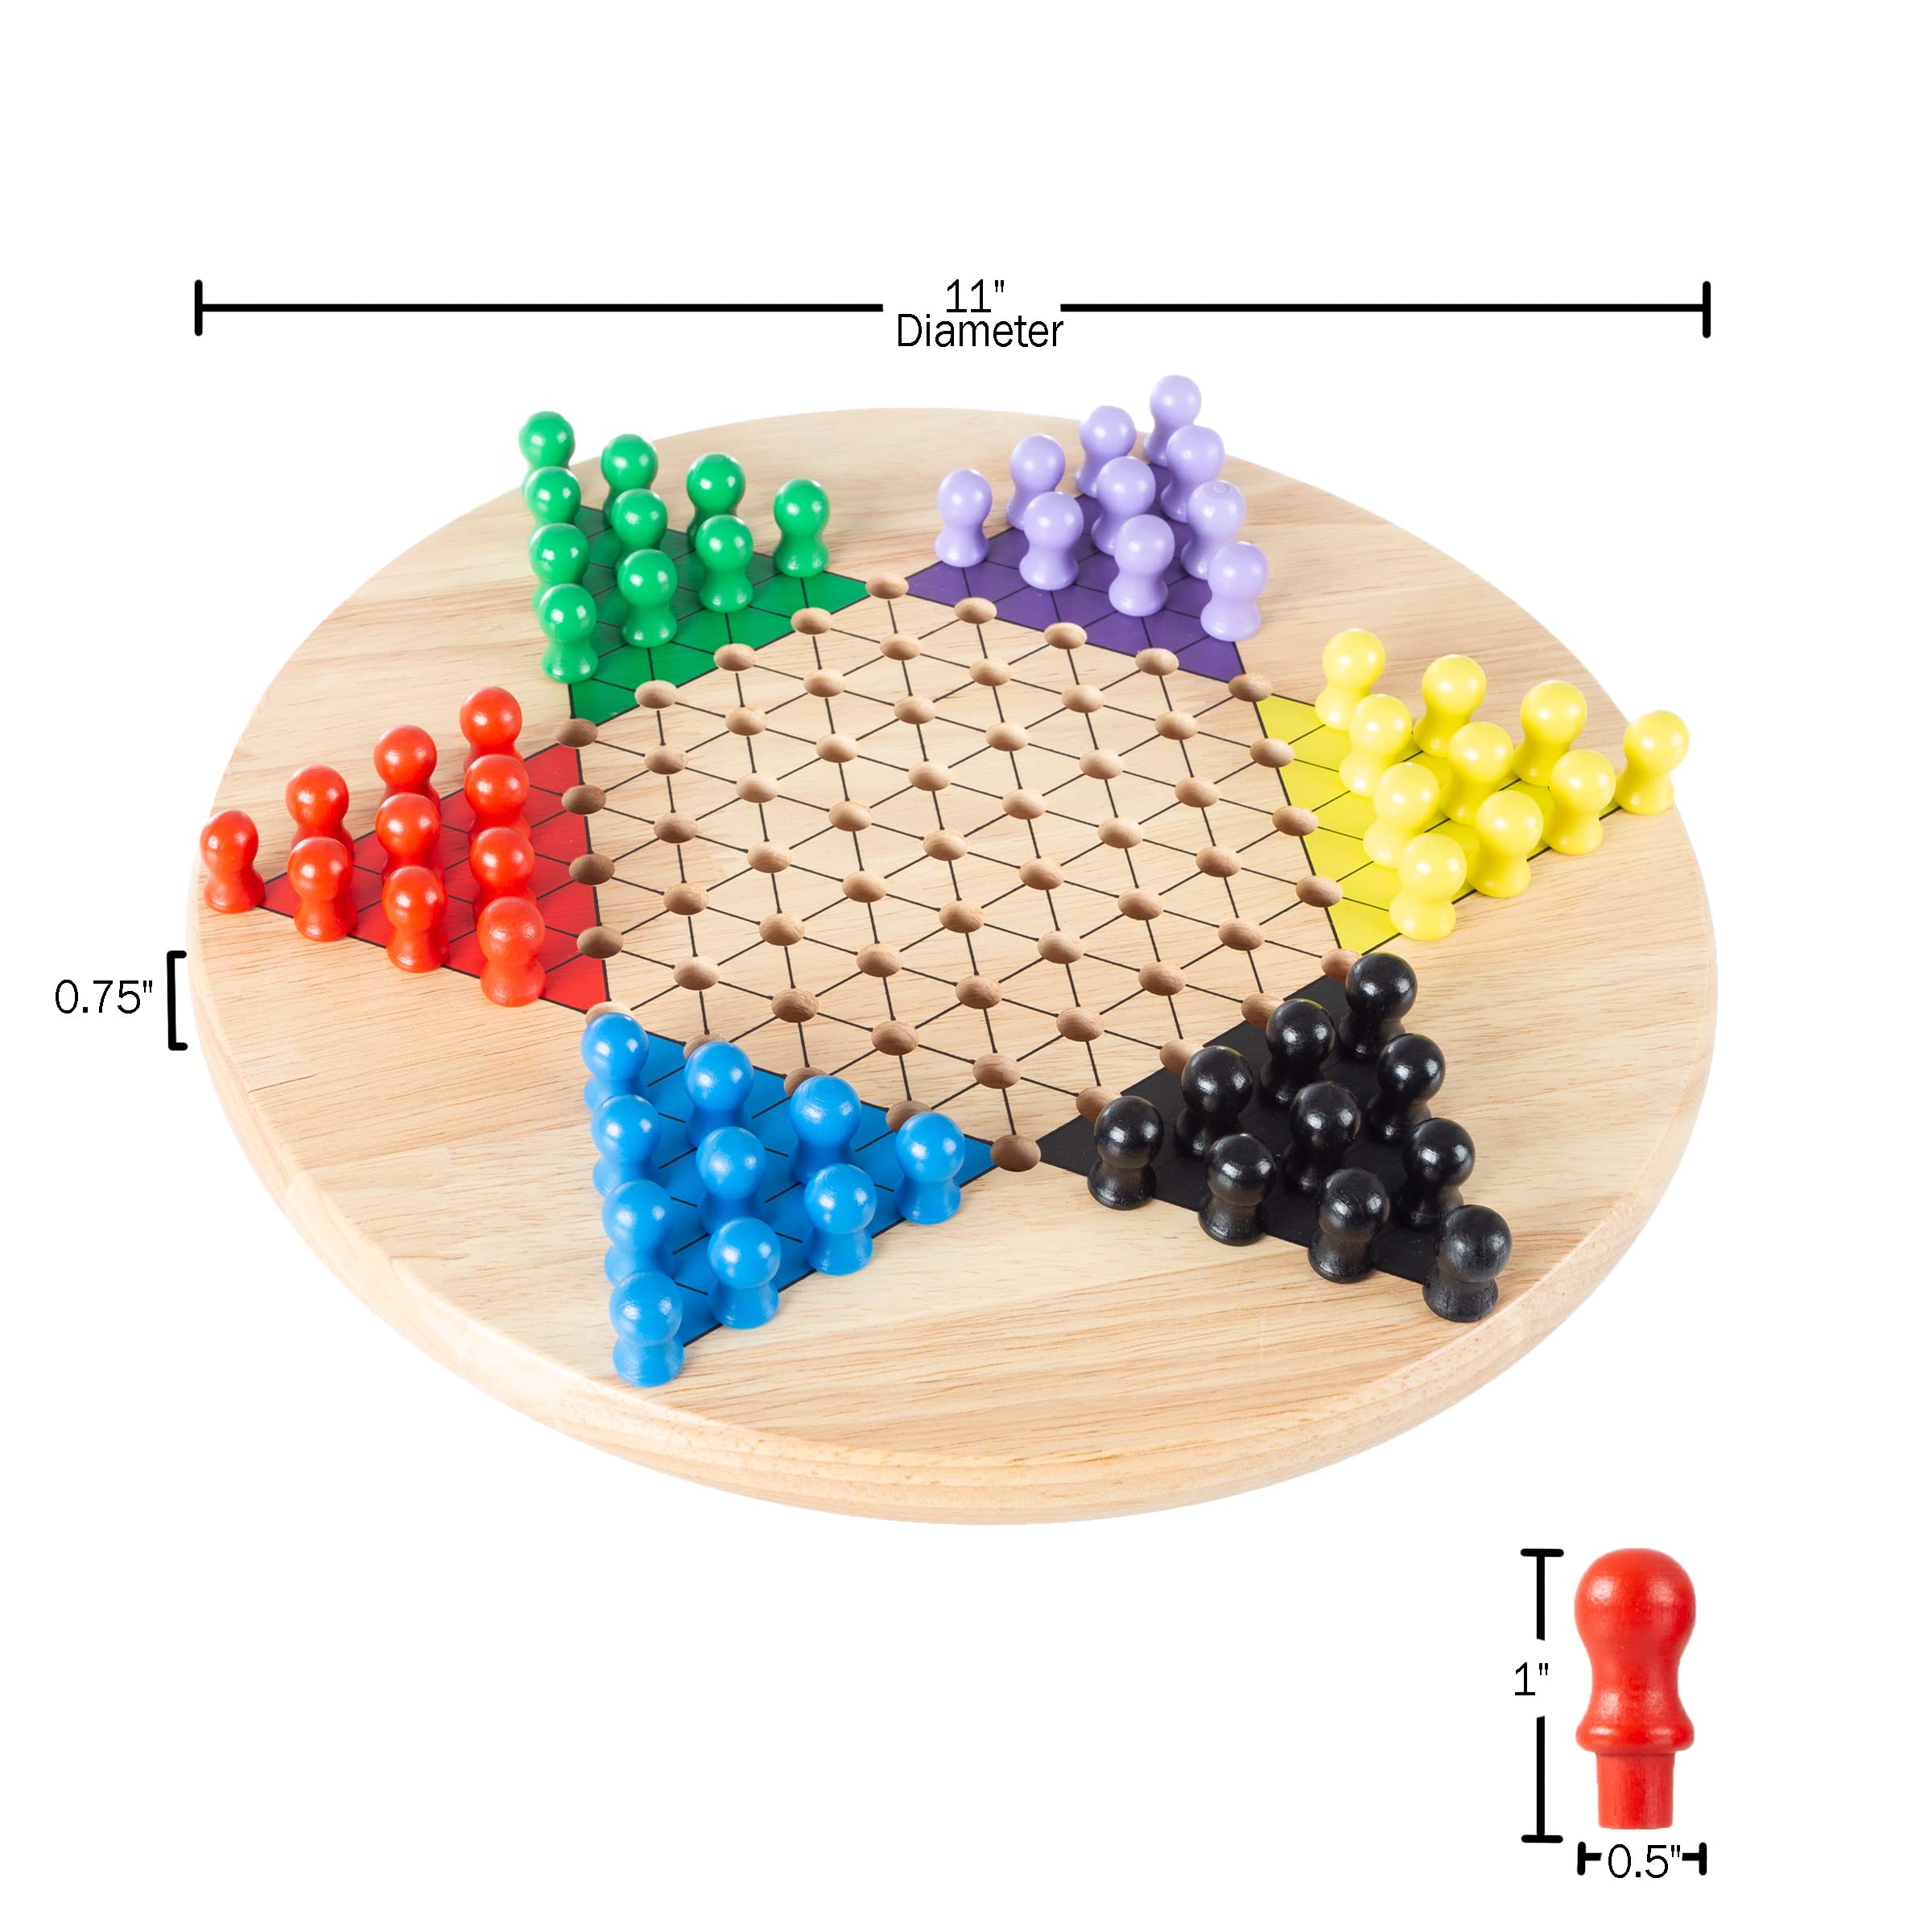 Chinese Checkers Game Set with 11 inch Wooden Board and Traditional Pegs, Game for Adults, Boys and Girls by Hey! Play!